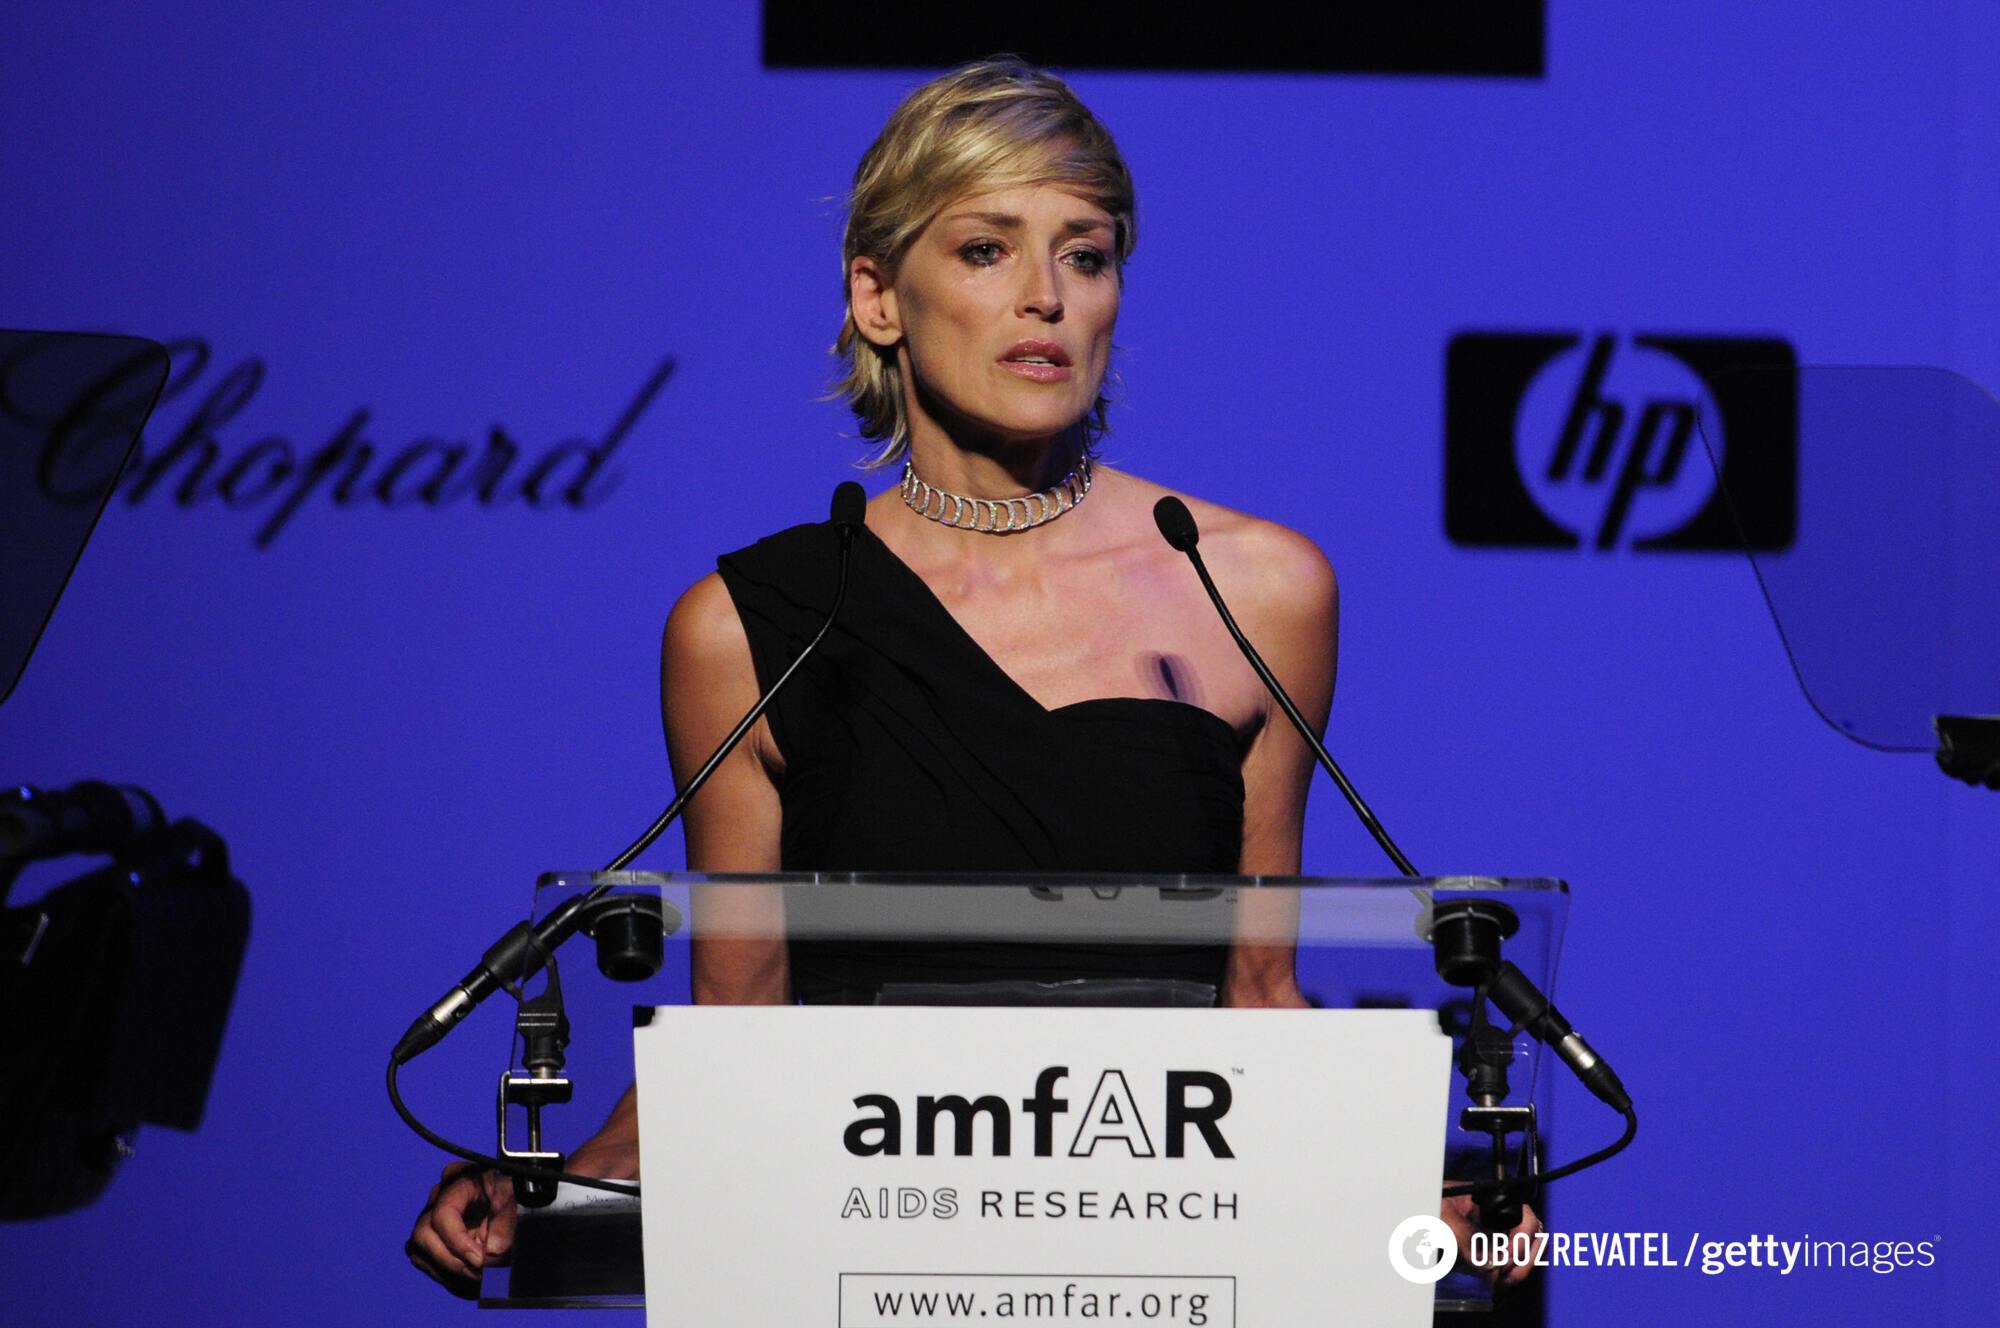 Sharon Stone opens up about how she lost her film roles due to memory problems after a stroke